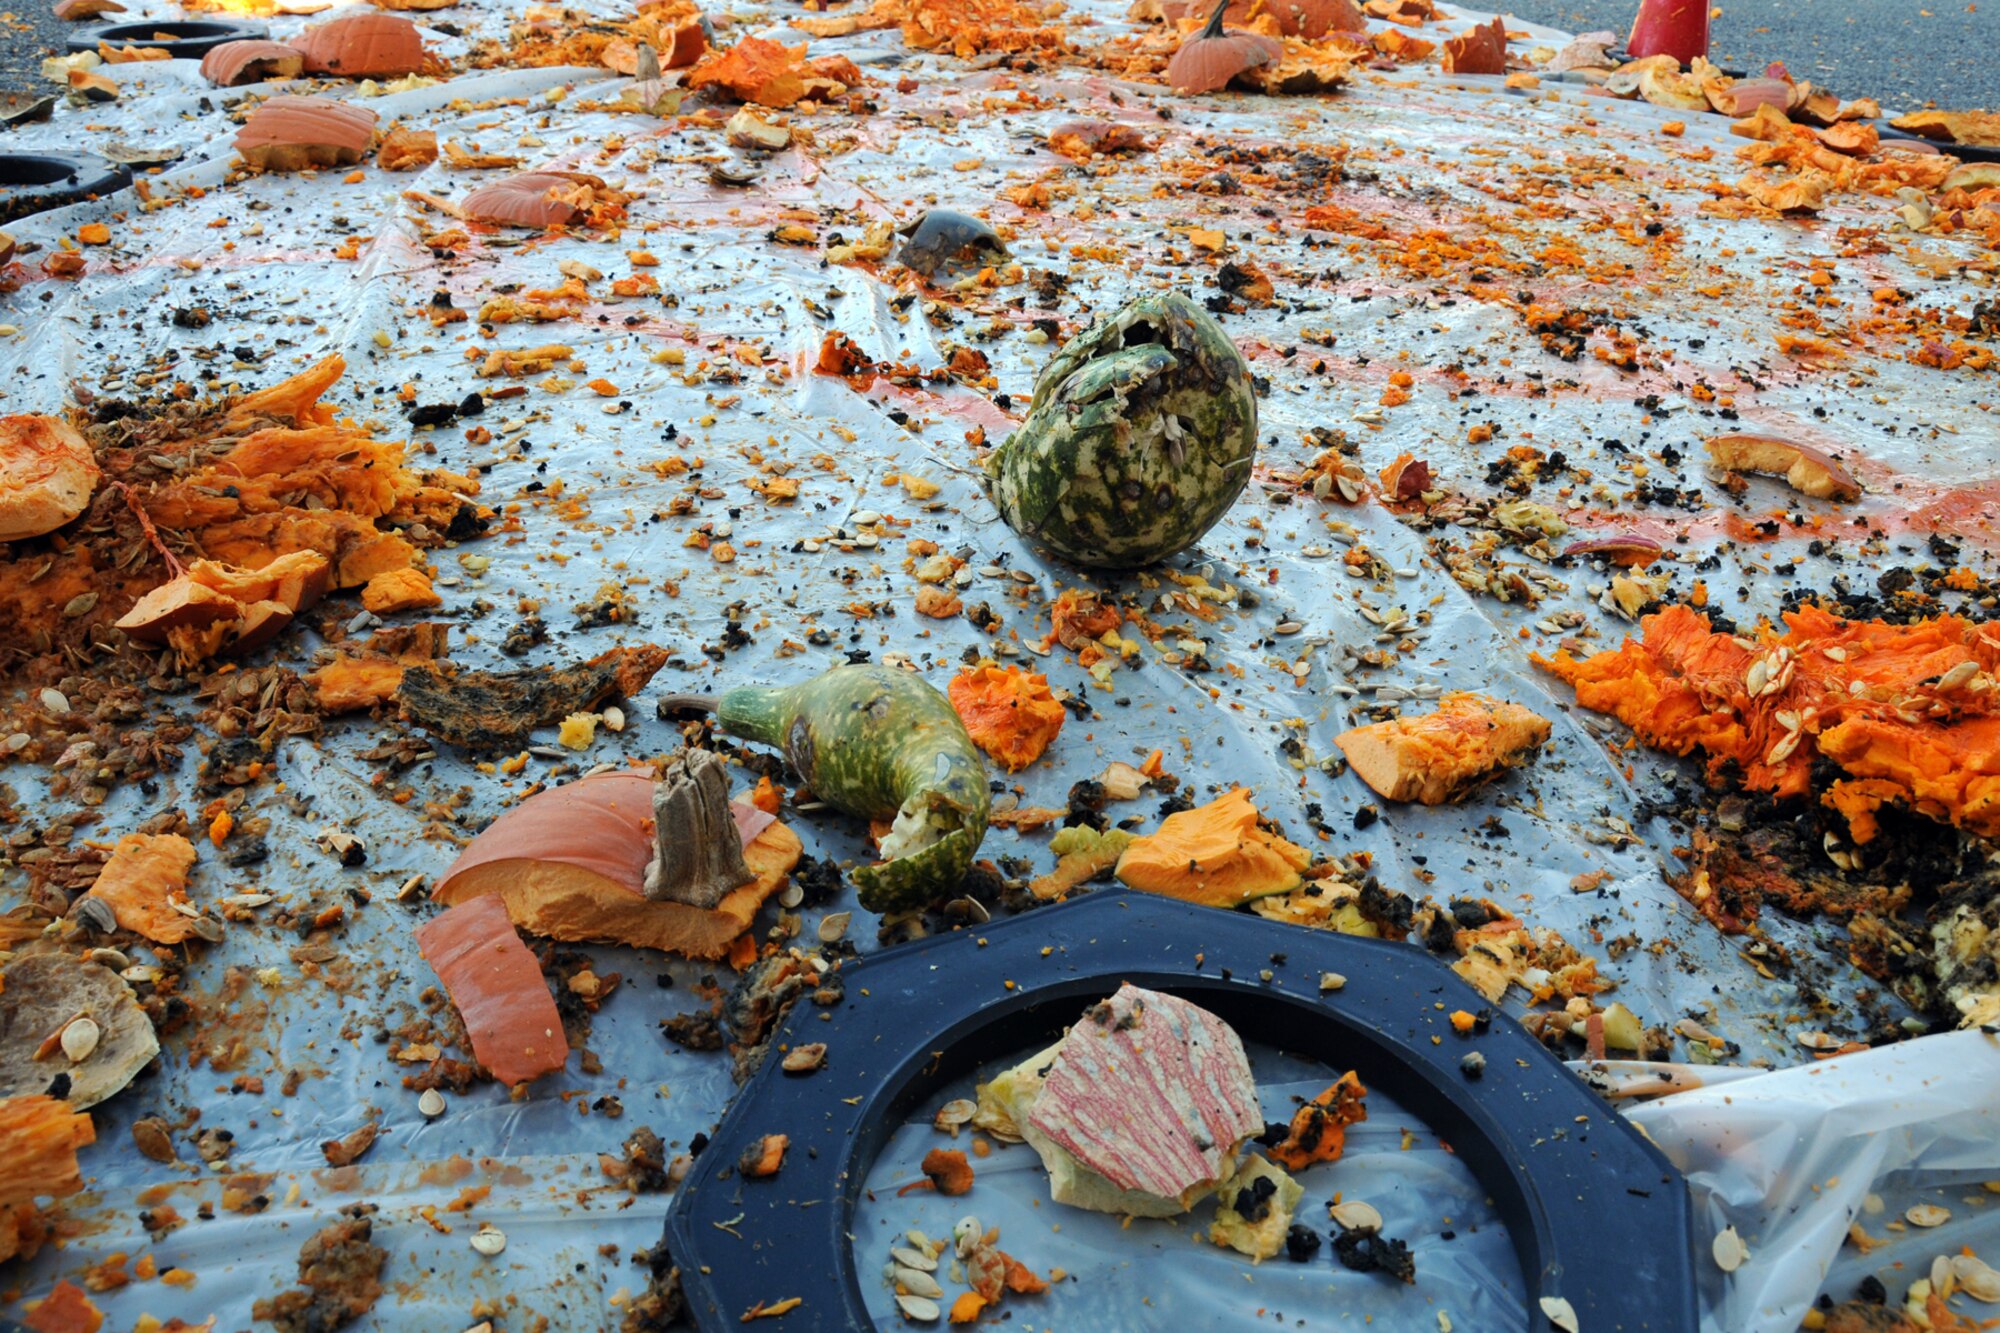 EGLIN AIR FORCE BASE, Fla. – The remains of obliterated pumpkins lay strewn across a tarp after a Pumpkin Smash competition Nov. 12. Participants tossed pumpkins from the top of a six-story building, aiming at a target on the ground. The event was hosted by the 53rd Wing as a fundraiser for their upcoming Children’s Christmas Party. (U.S. Air Force/ Airman 1st Class Anthony Jennings)